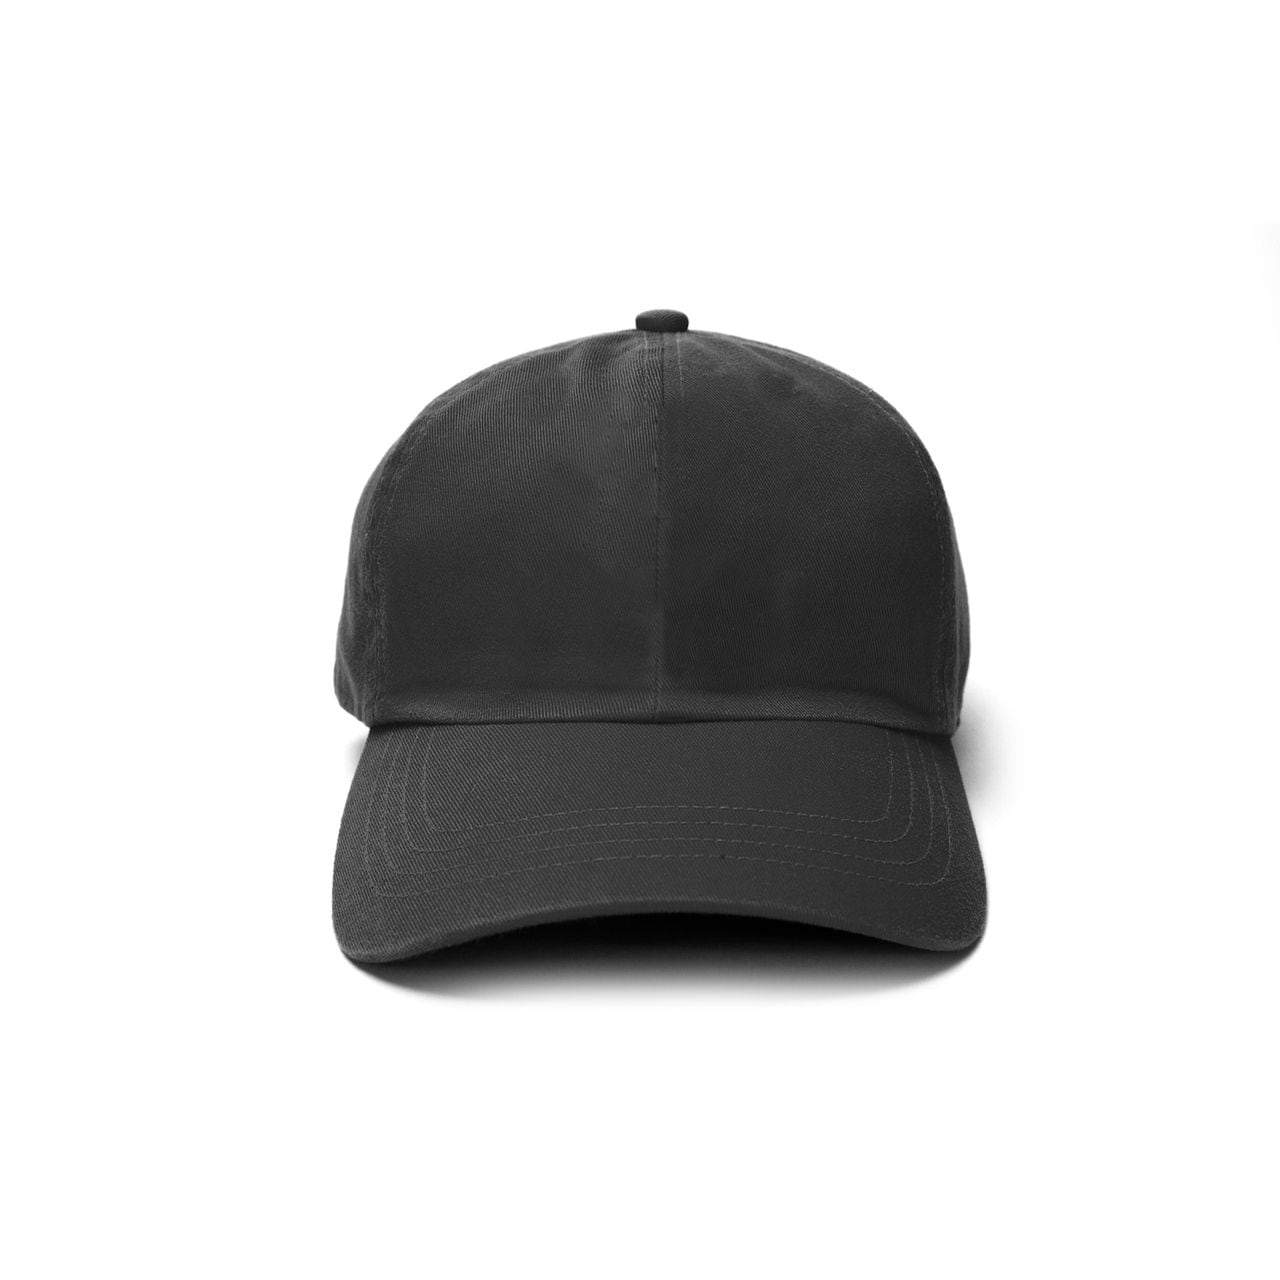 Photograph in New York City. April 16th 2002. A black baseball cap on a white background ready for logo branding.